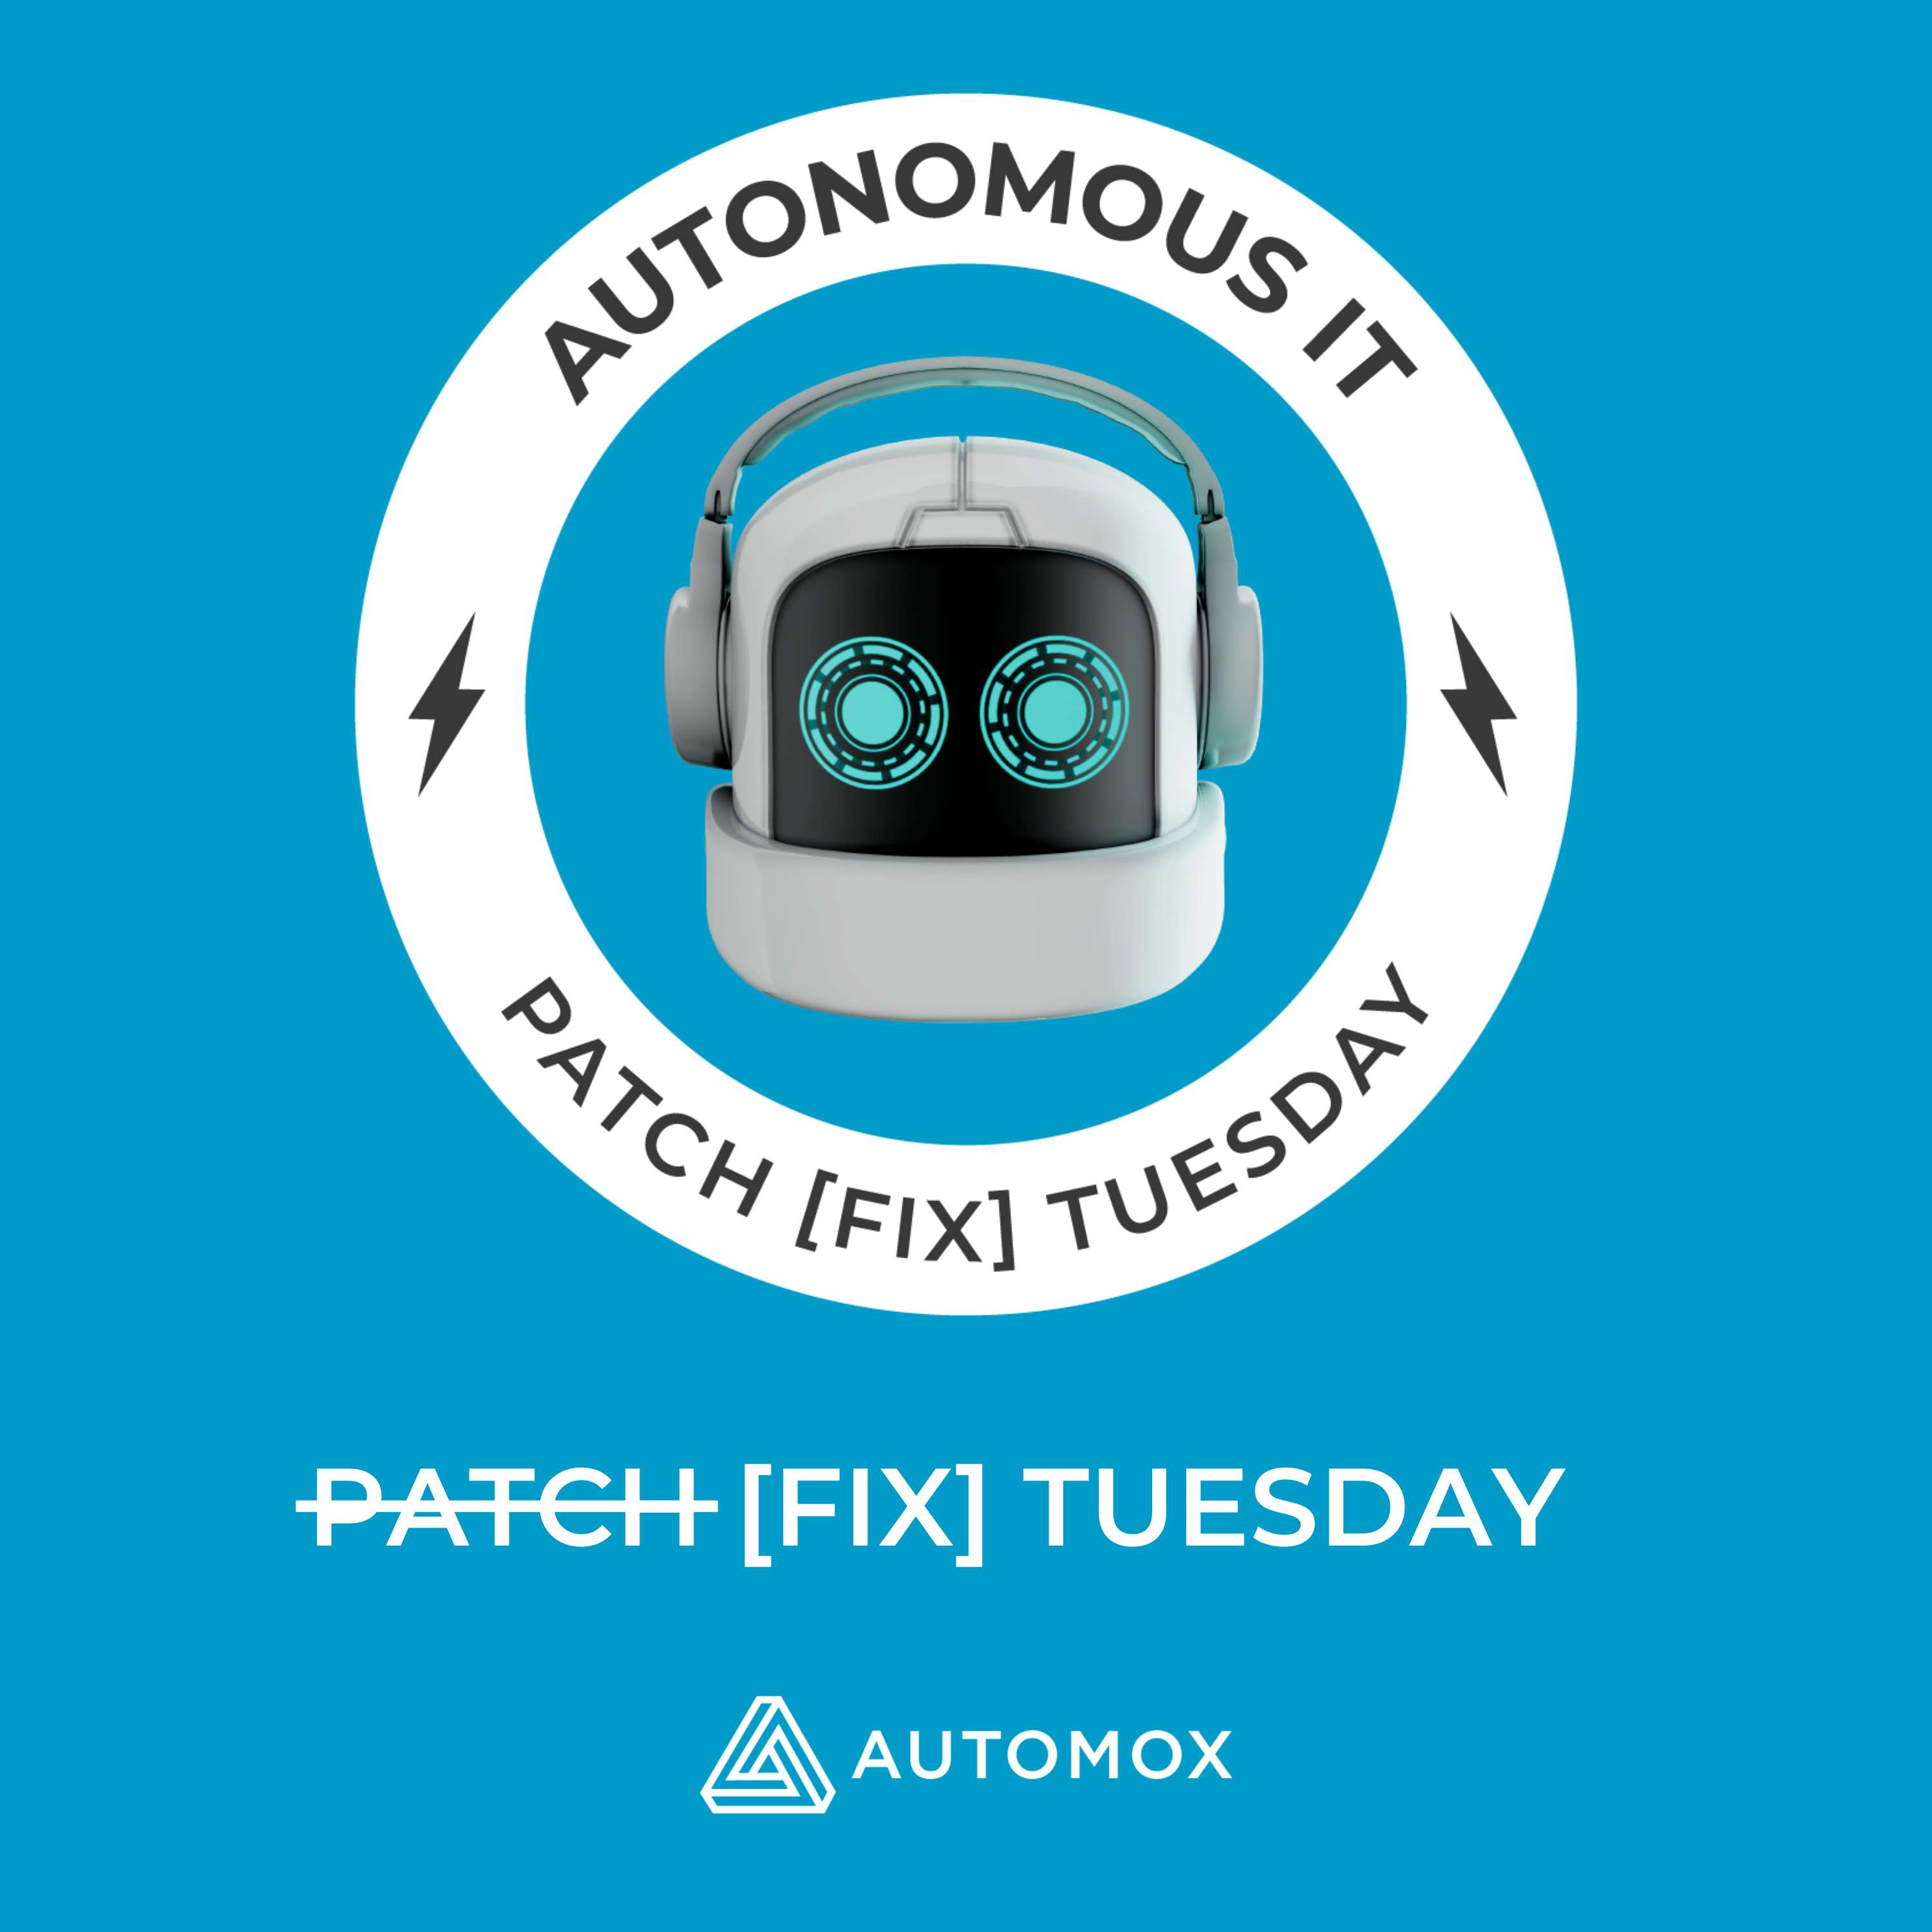 Patch [Fix] Tuesday – July 2024 [Major Vulnerabilities Uncovered on Patch Tuesday!], E09